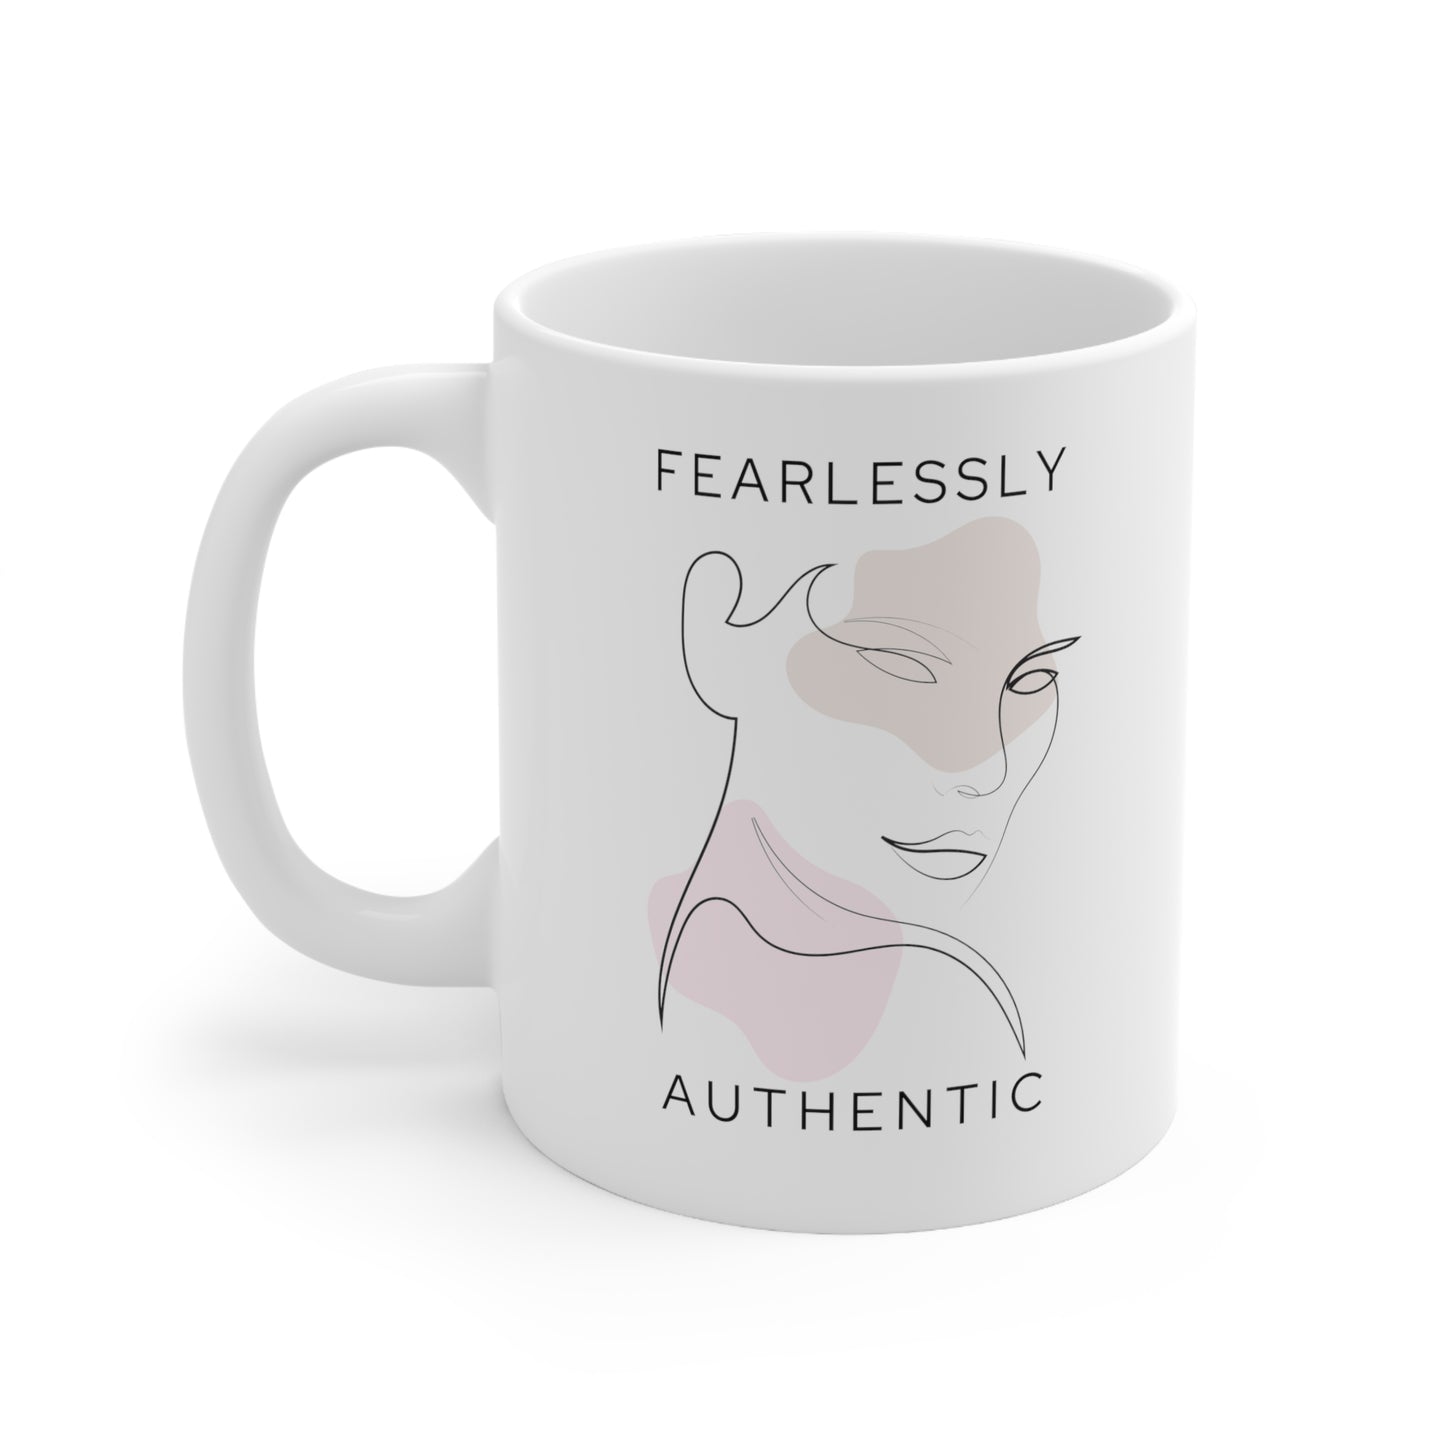 Fearlessly Authentic Coffee Mugs | 6 Designs | Individual Mug or Set of 6 | 11 oz